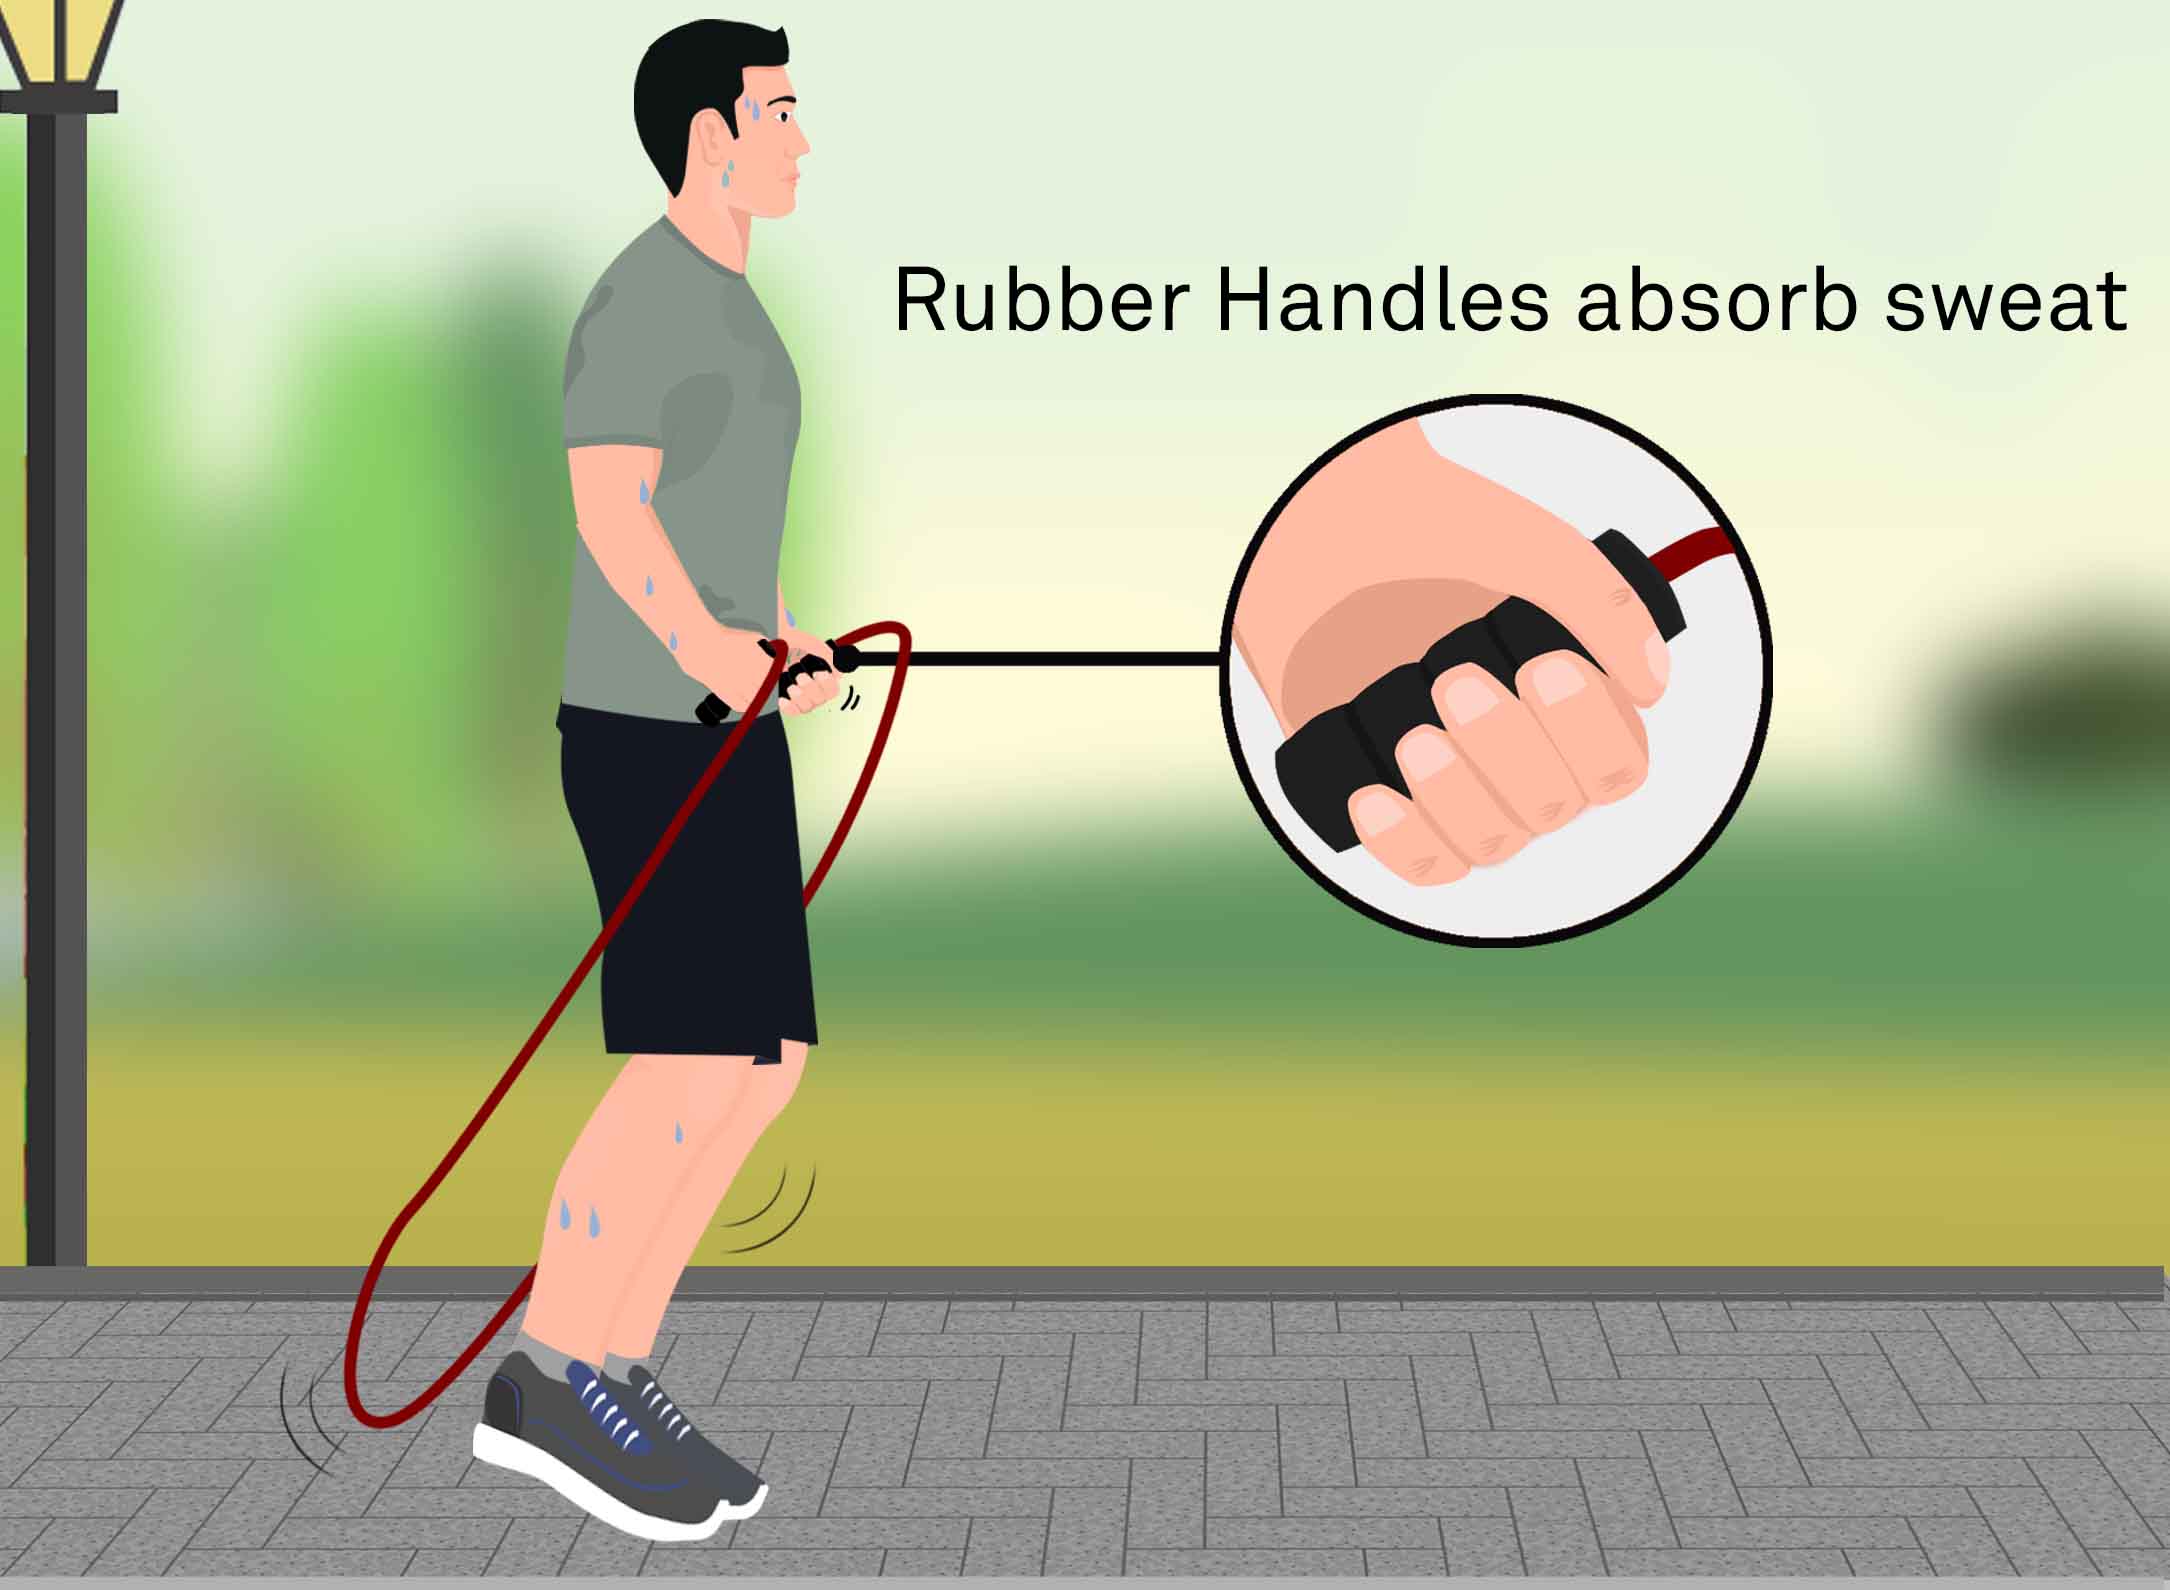 Choose rubber handles for sweat absorption and foam handles for comfort.